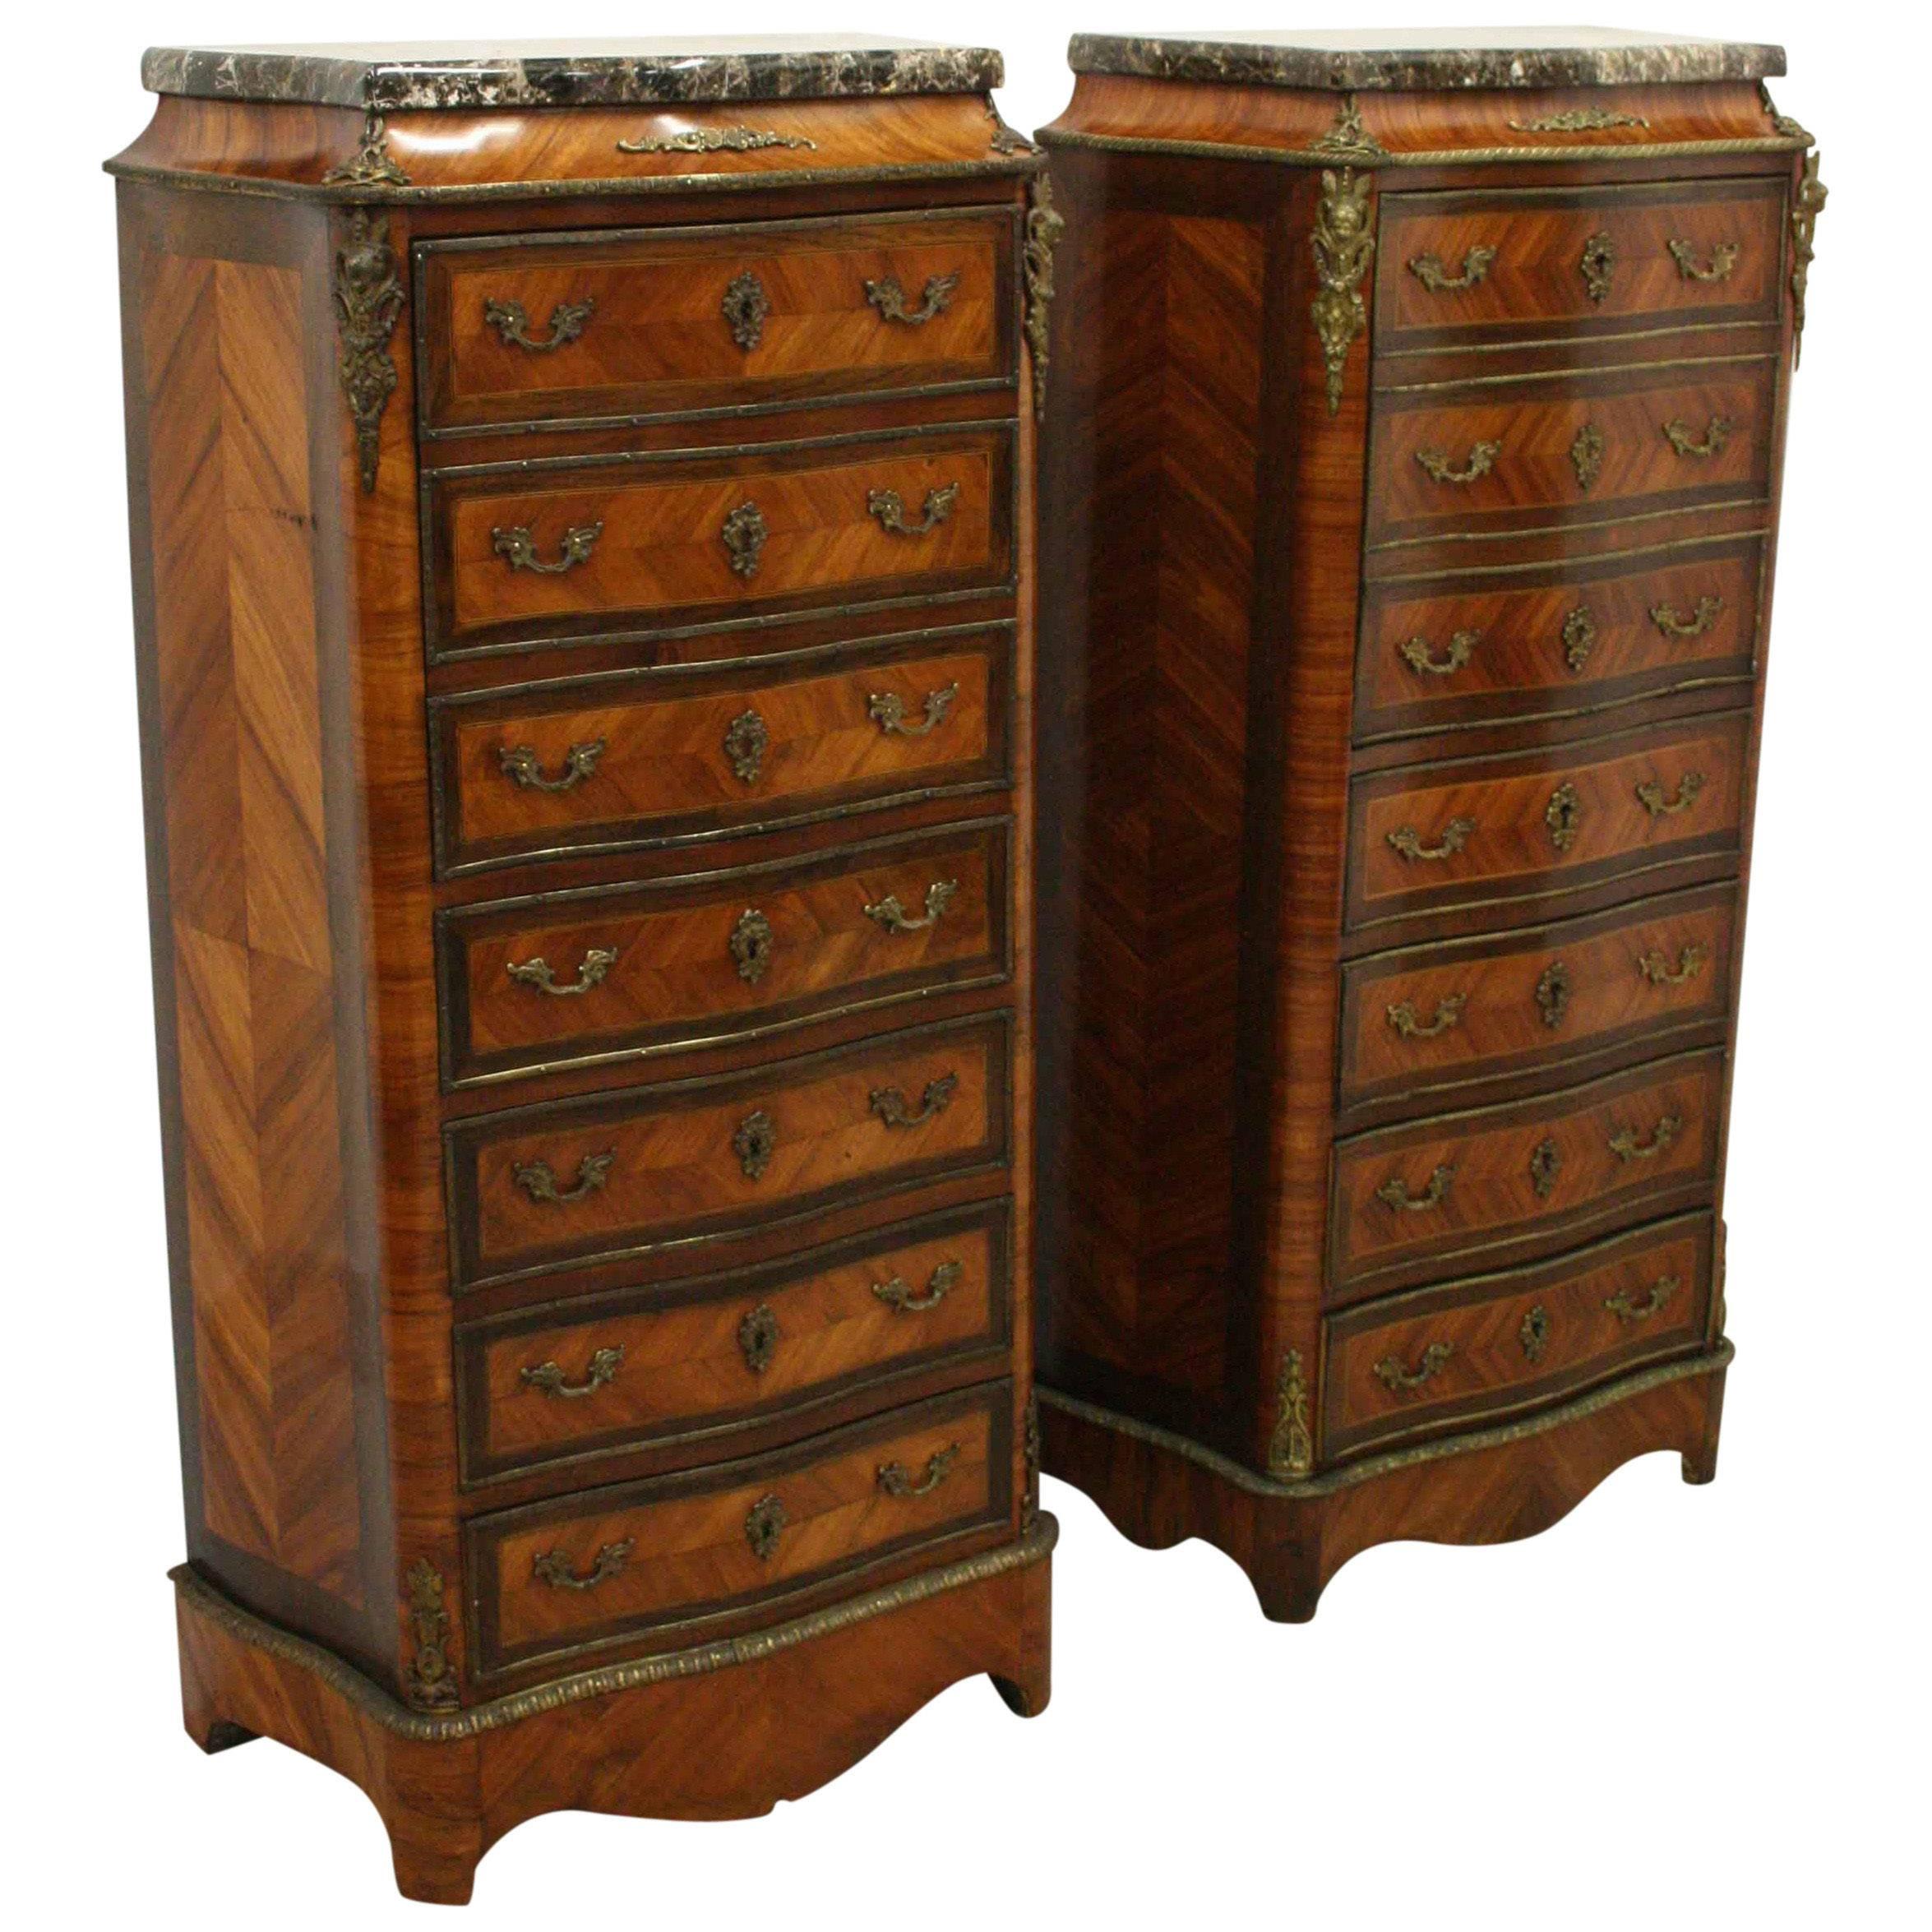 Rare matched pair of French ormolu mounted serpentine secretaire chests, with caryatid mounts, circa 1880. The variegated marble tops above the secretaire drawer and four further serpentine drawers, all standing on an ormolu mounted shaped plinth